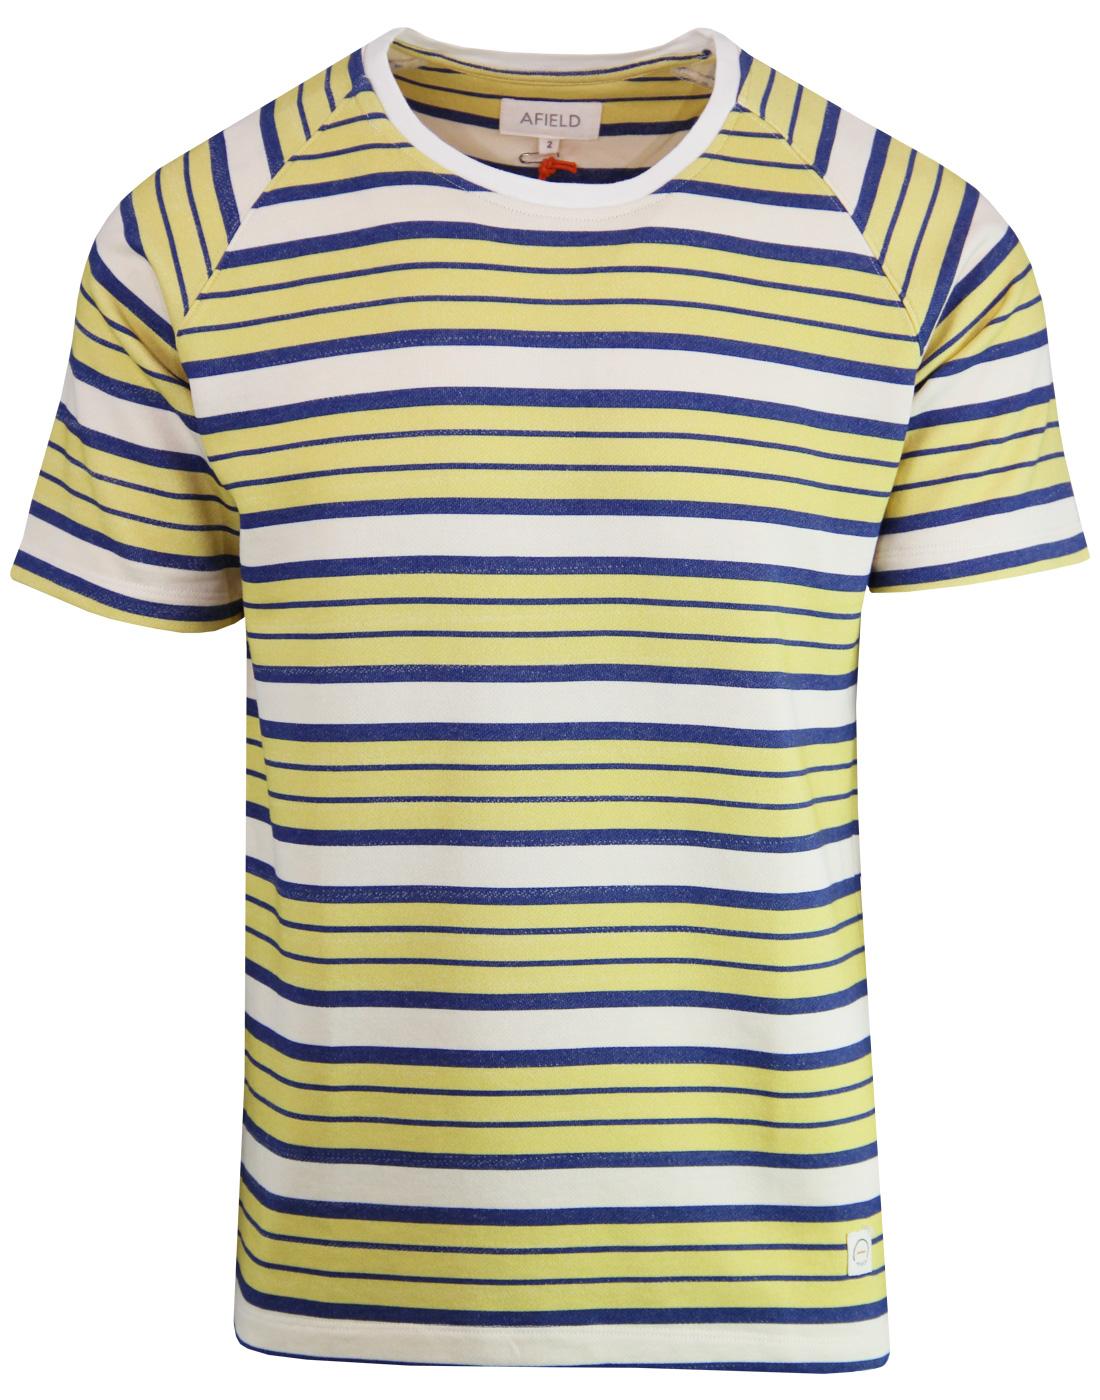 AFIELD Soy Retro 70s French Terry Cotton Stripe T-shirt Blue